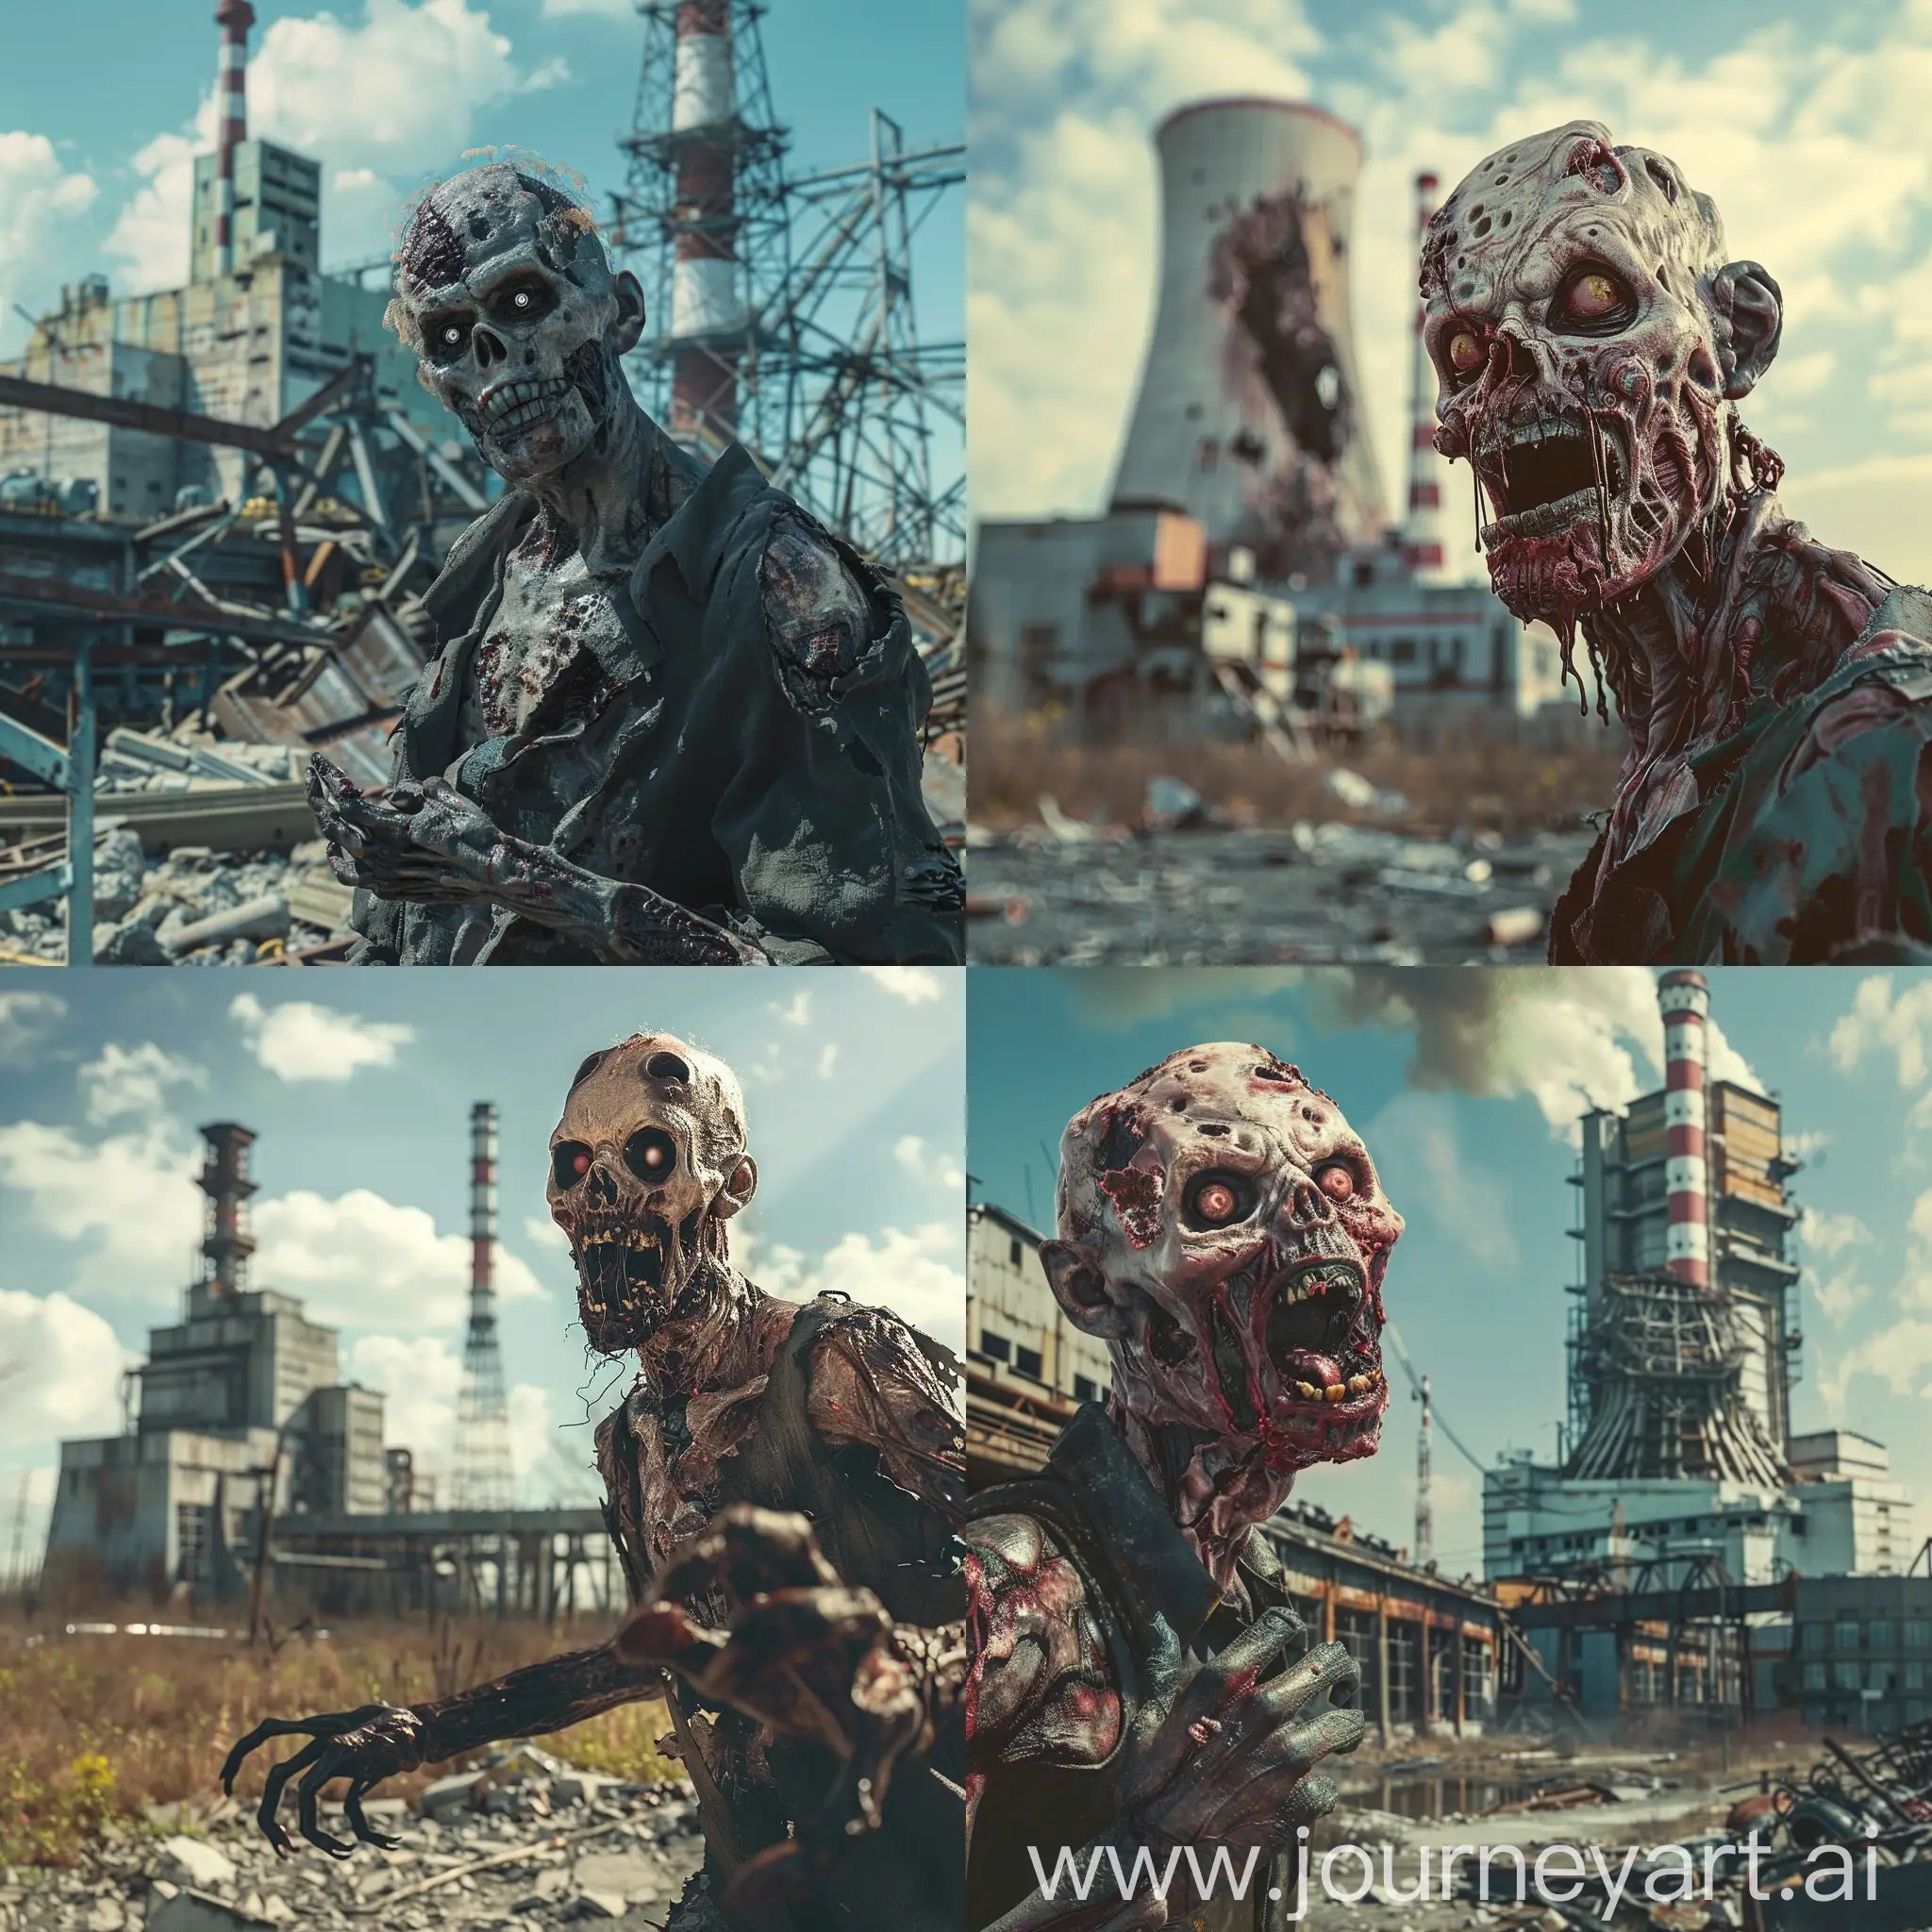 A radioactive zombie against the background of a destroyed nuclear power plant